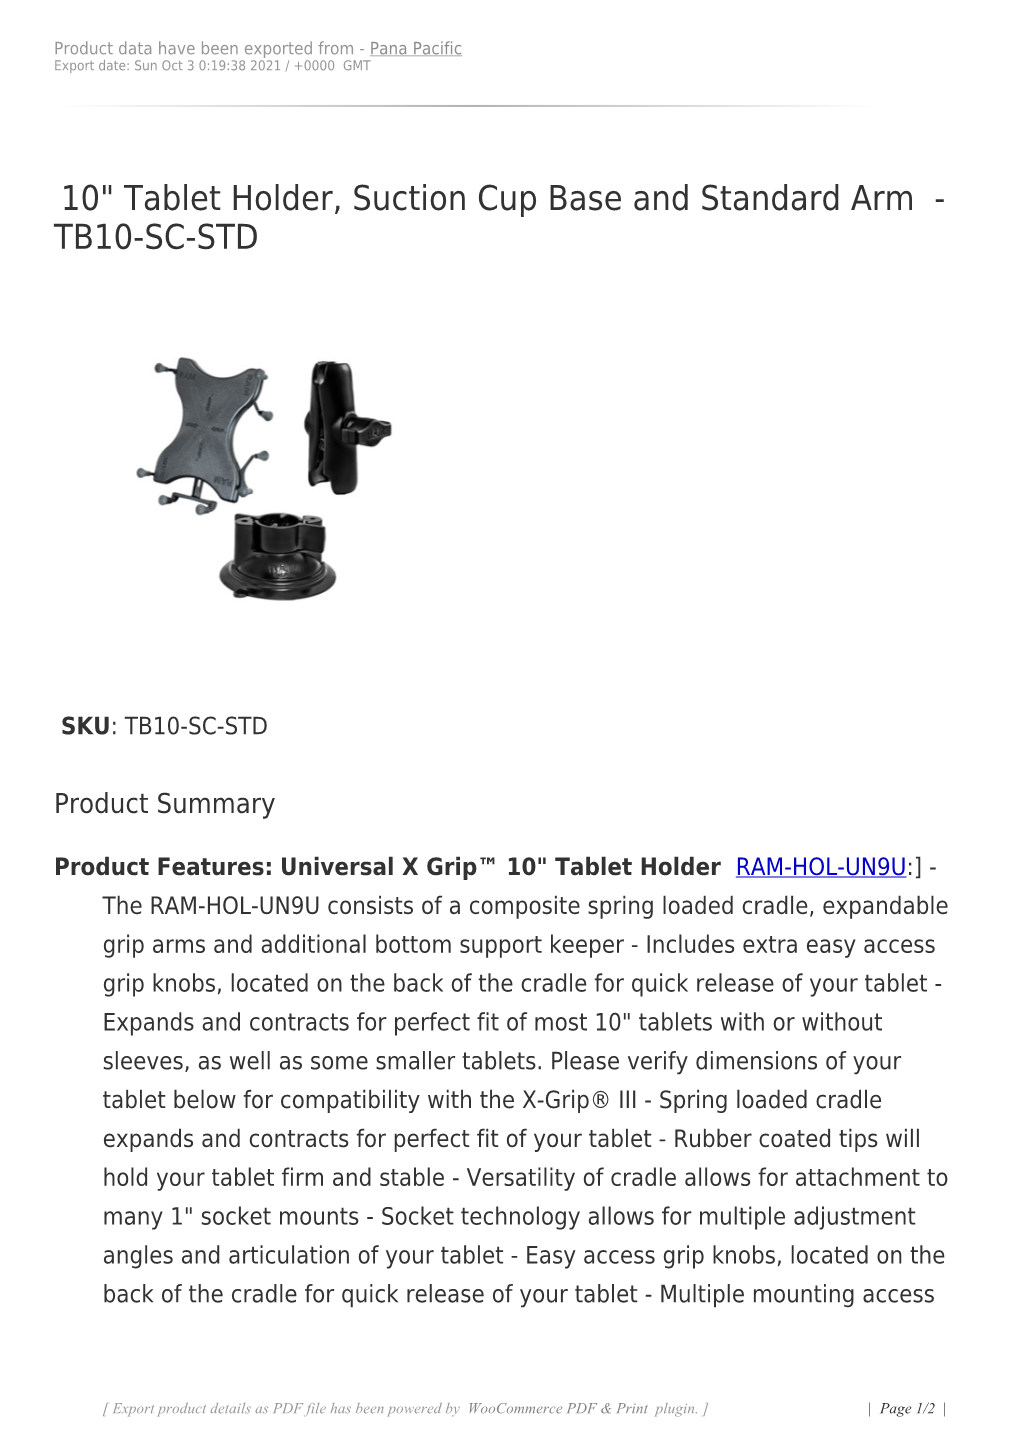 10" Tablet Holder, Suction Cup Base and Standard Arm - TB10-SC-STD